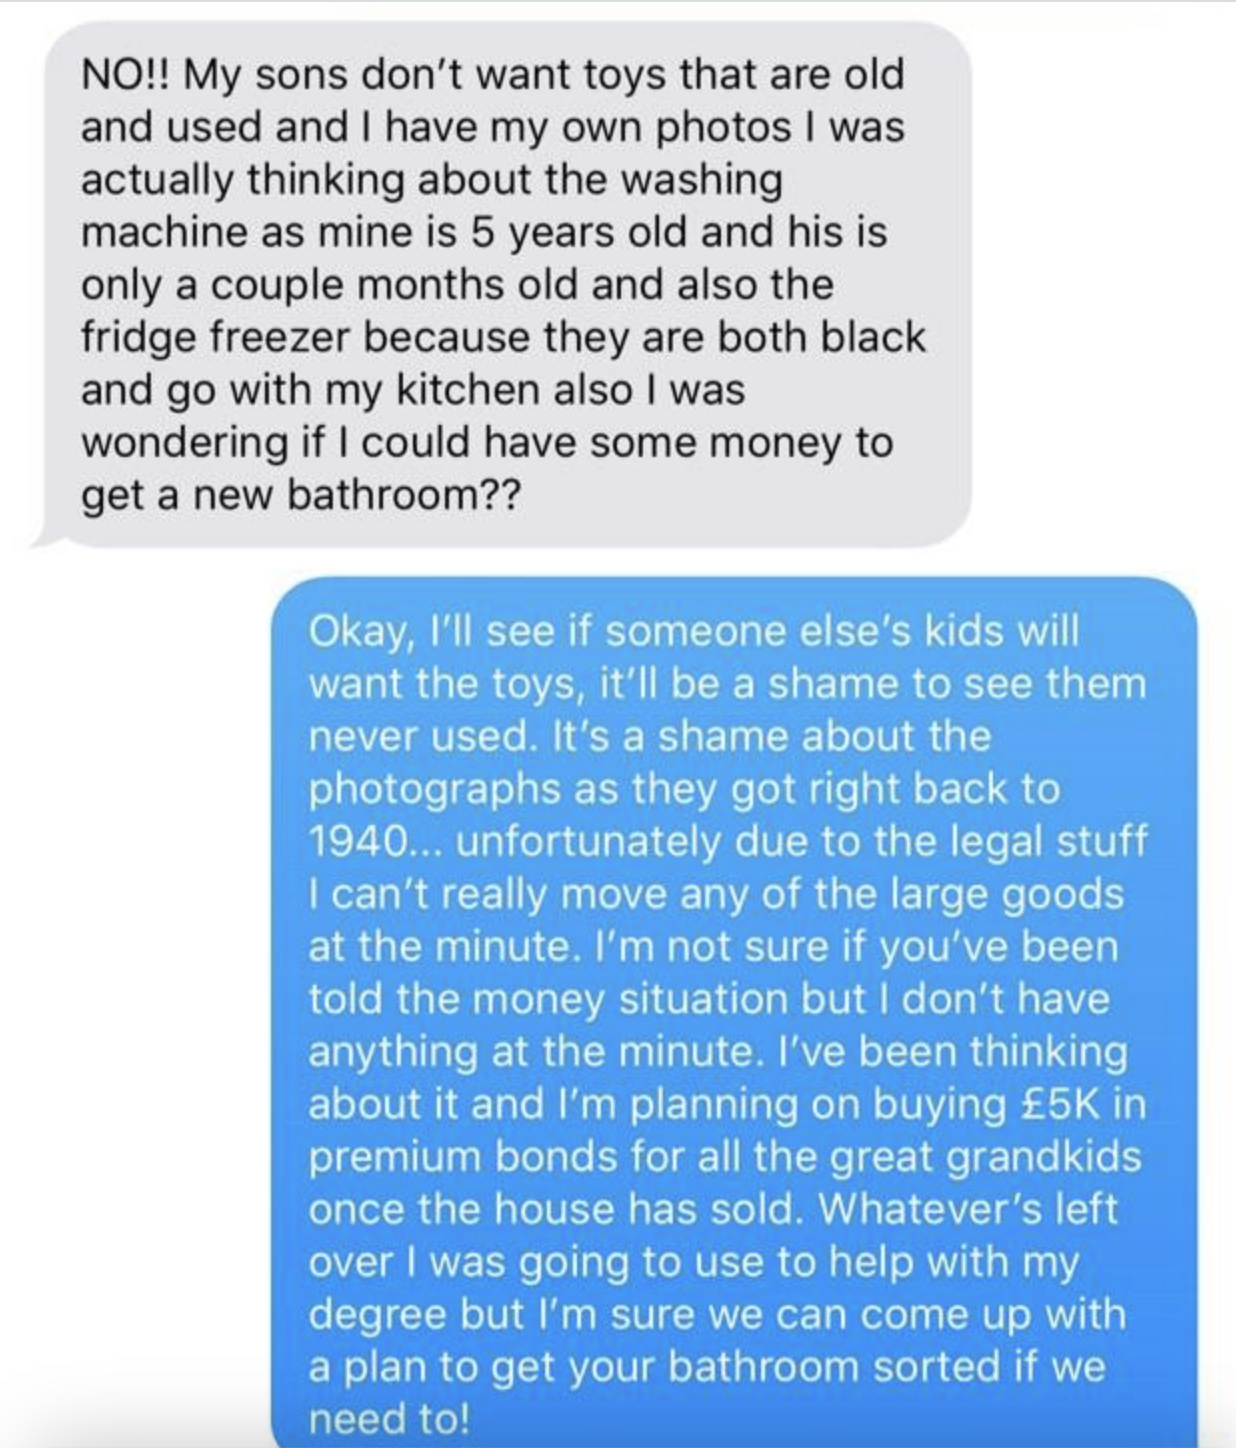 person two offers up photographs and toys but person 1 only wants the grandfather&#x27;s new washing machine and money so that they can have a new bathroom. person two says they would try to help